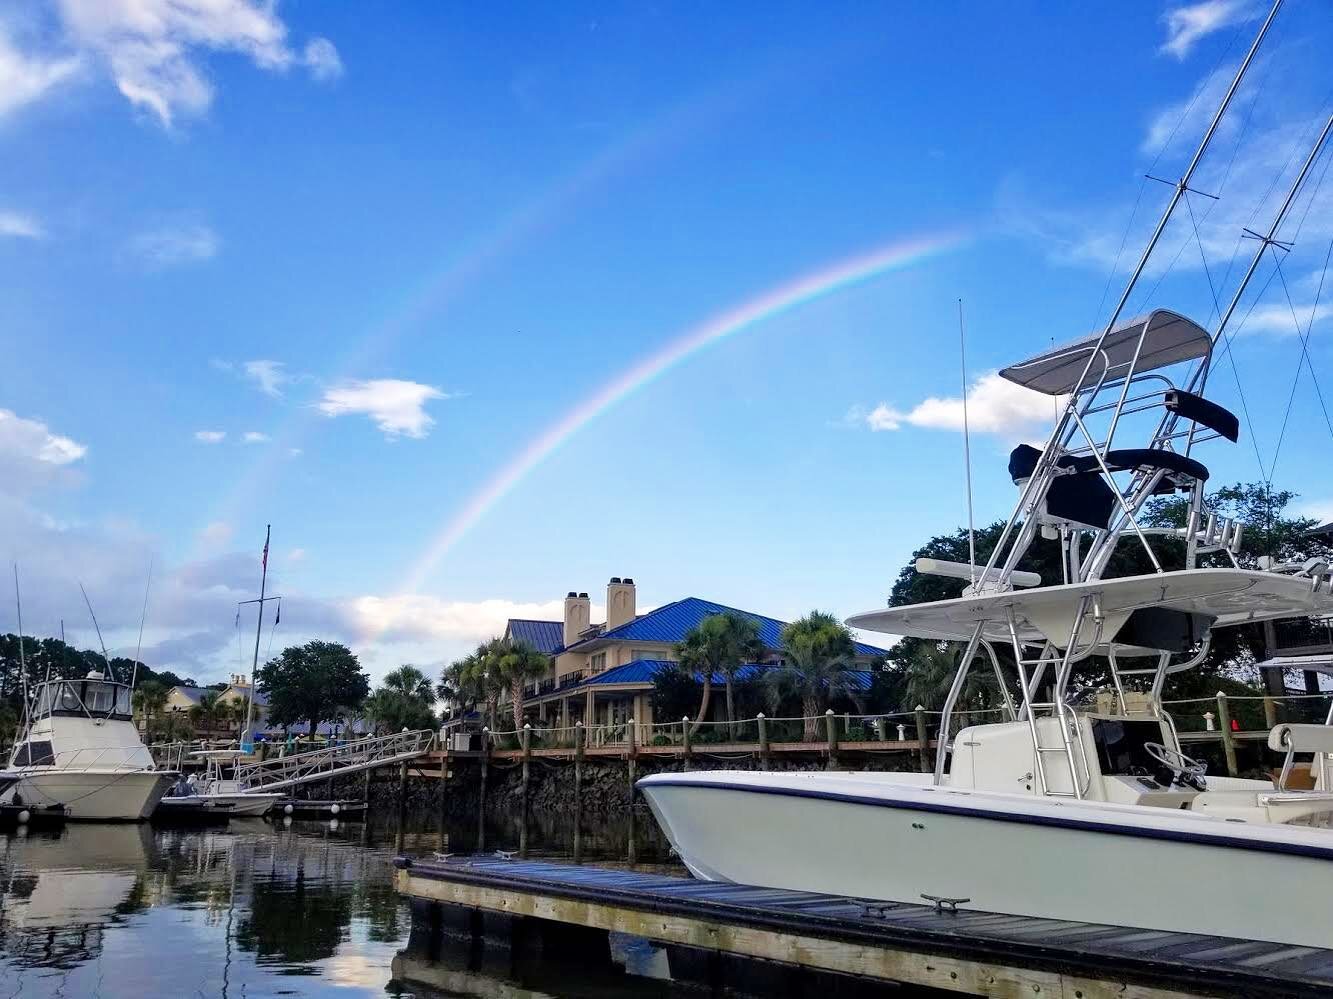 It&rsquo;s a double rainbow!🌈🌈 the views here are something we can get use to! #bohicketmarina #charlestonsc #summer2020 #rainbow